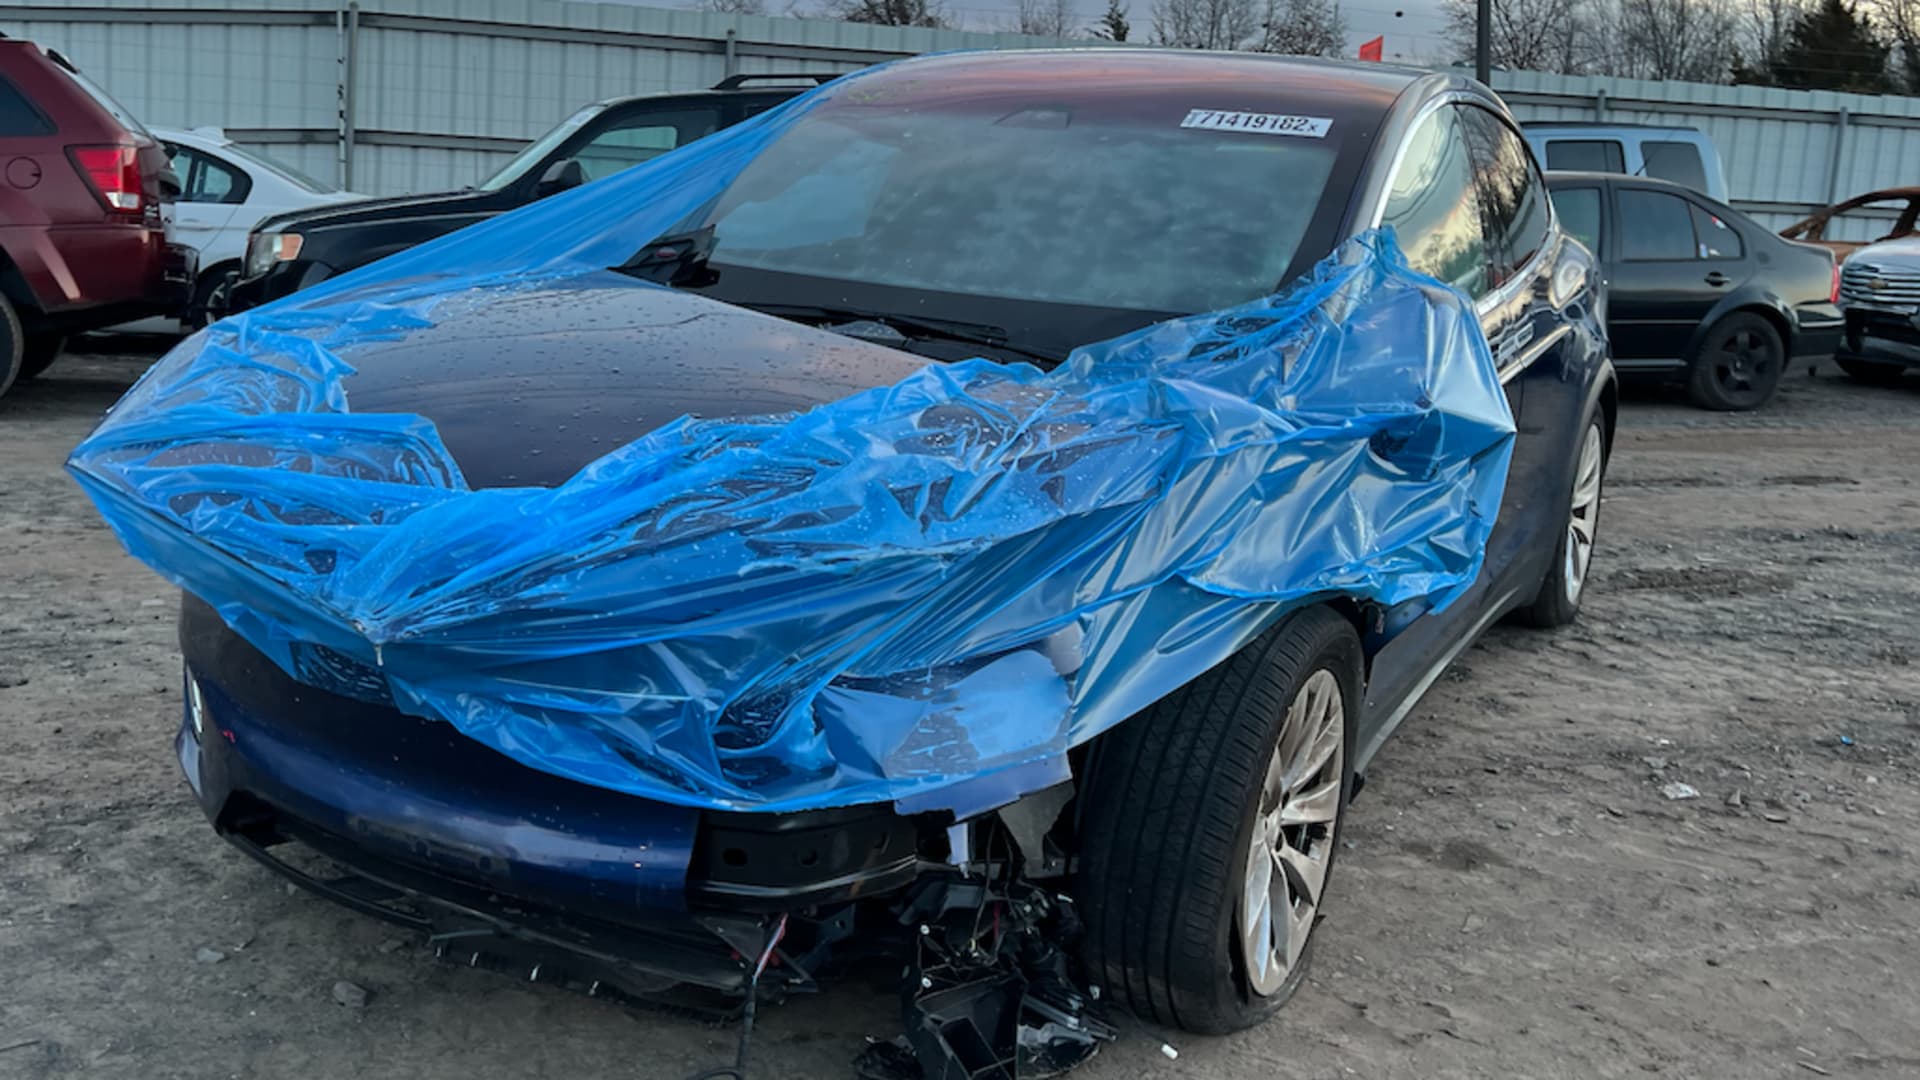 A totaled Tesla was sold for parts in the U.S. but came back online in Ukraine — here’s what happened